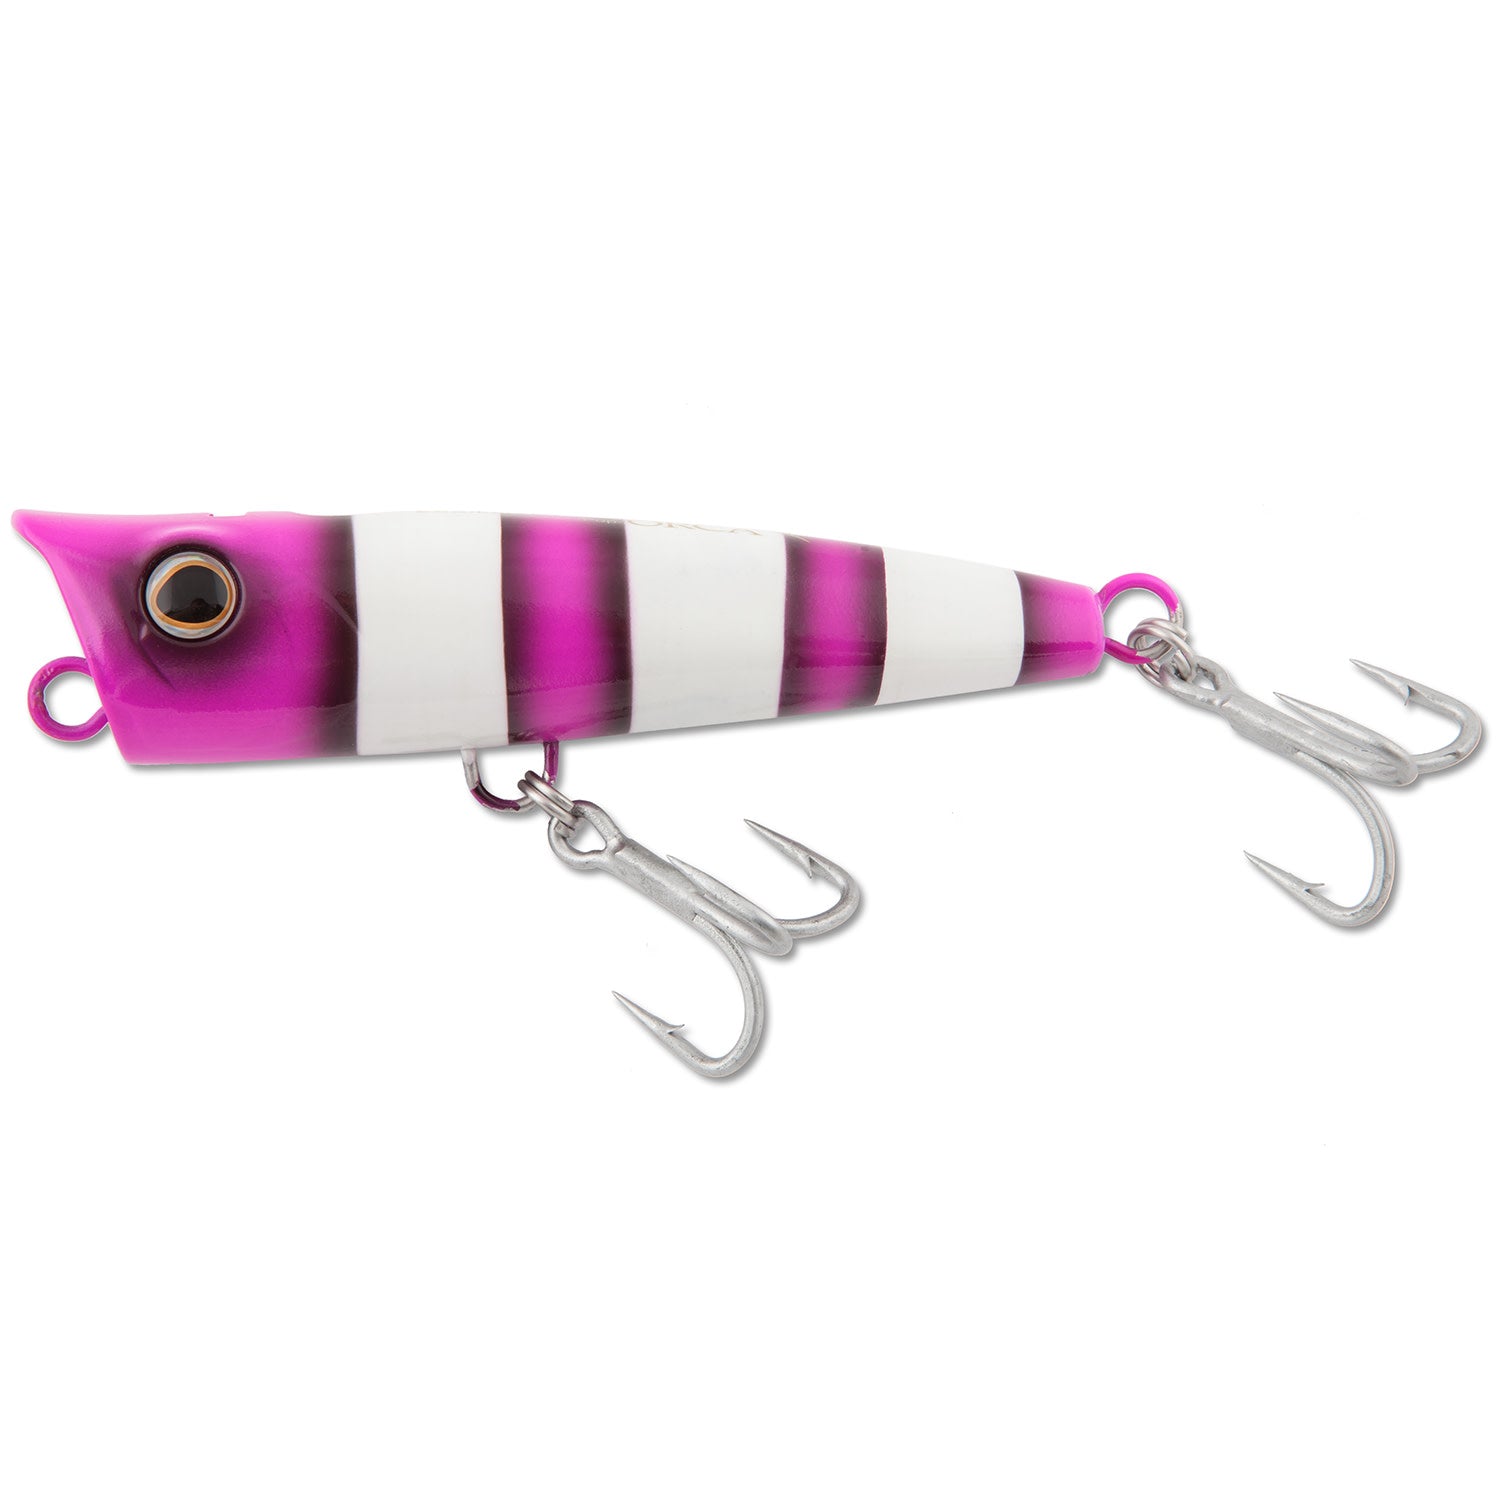 Buy SHIMANO POP ORCA Poppers Fishing Lures, 90mm-3 1/2in - 23g-6/8oz,  Injured Sardine Online at Low Prices in India 